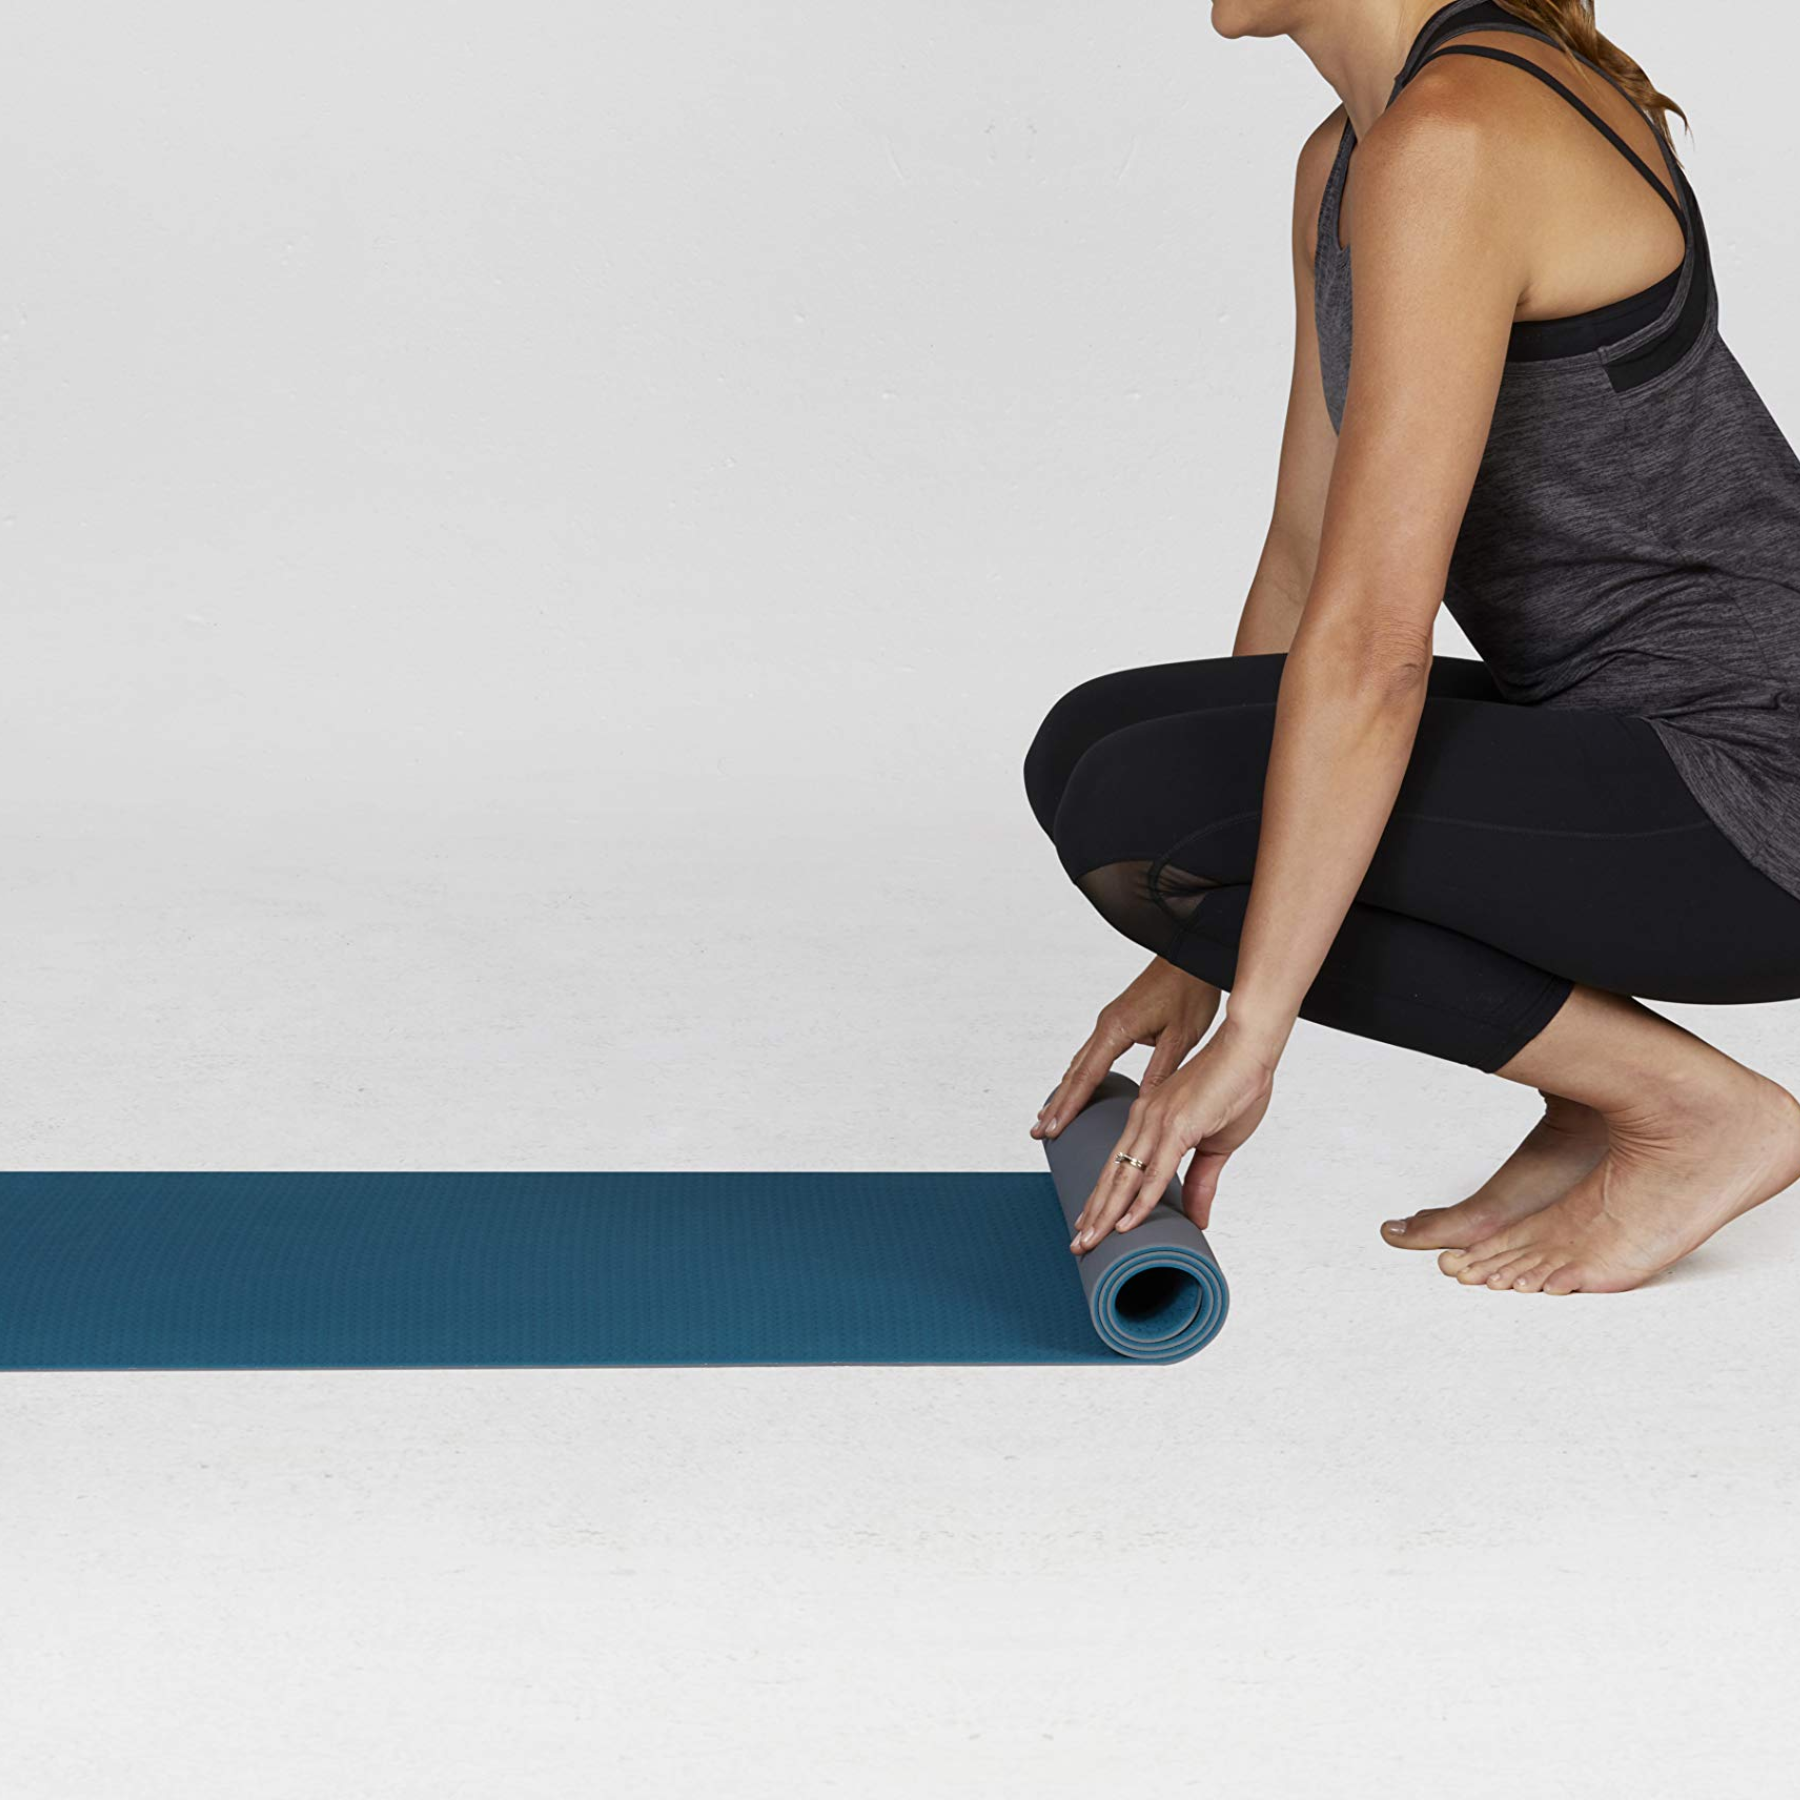 Gaiam Performance Soft Grip Yoga Mat Teal and Charcoal